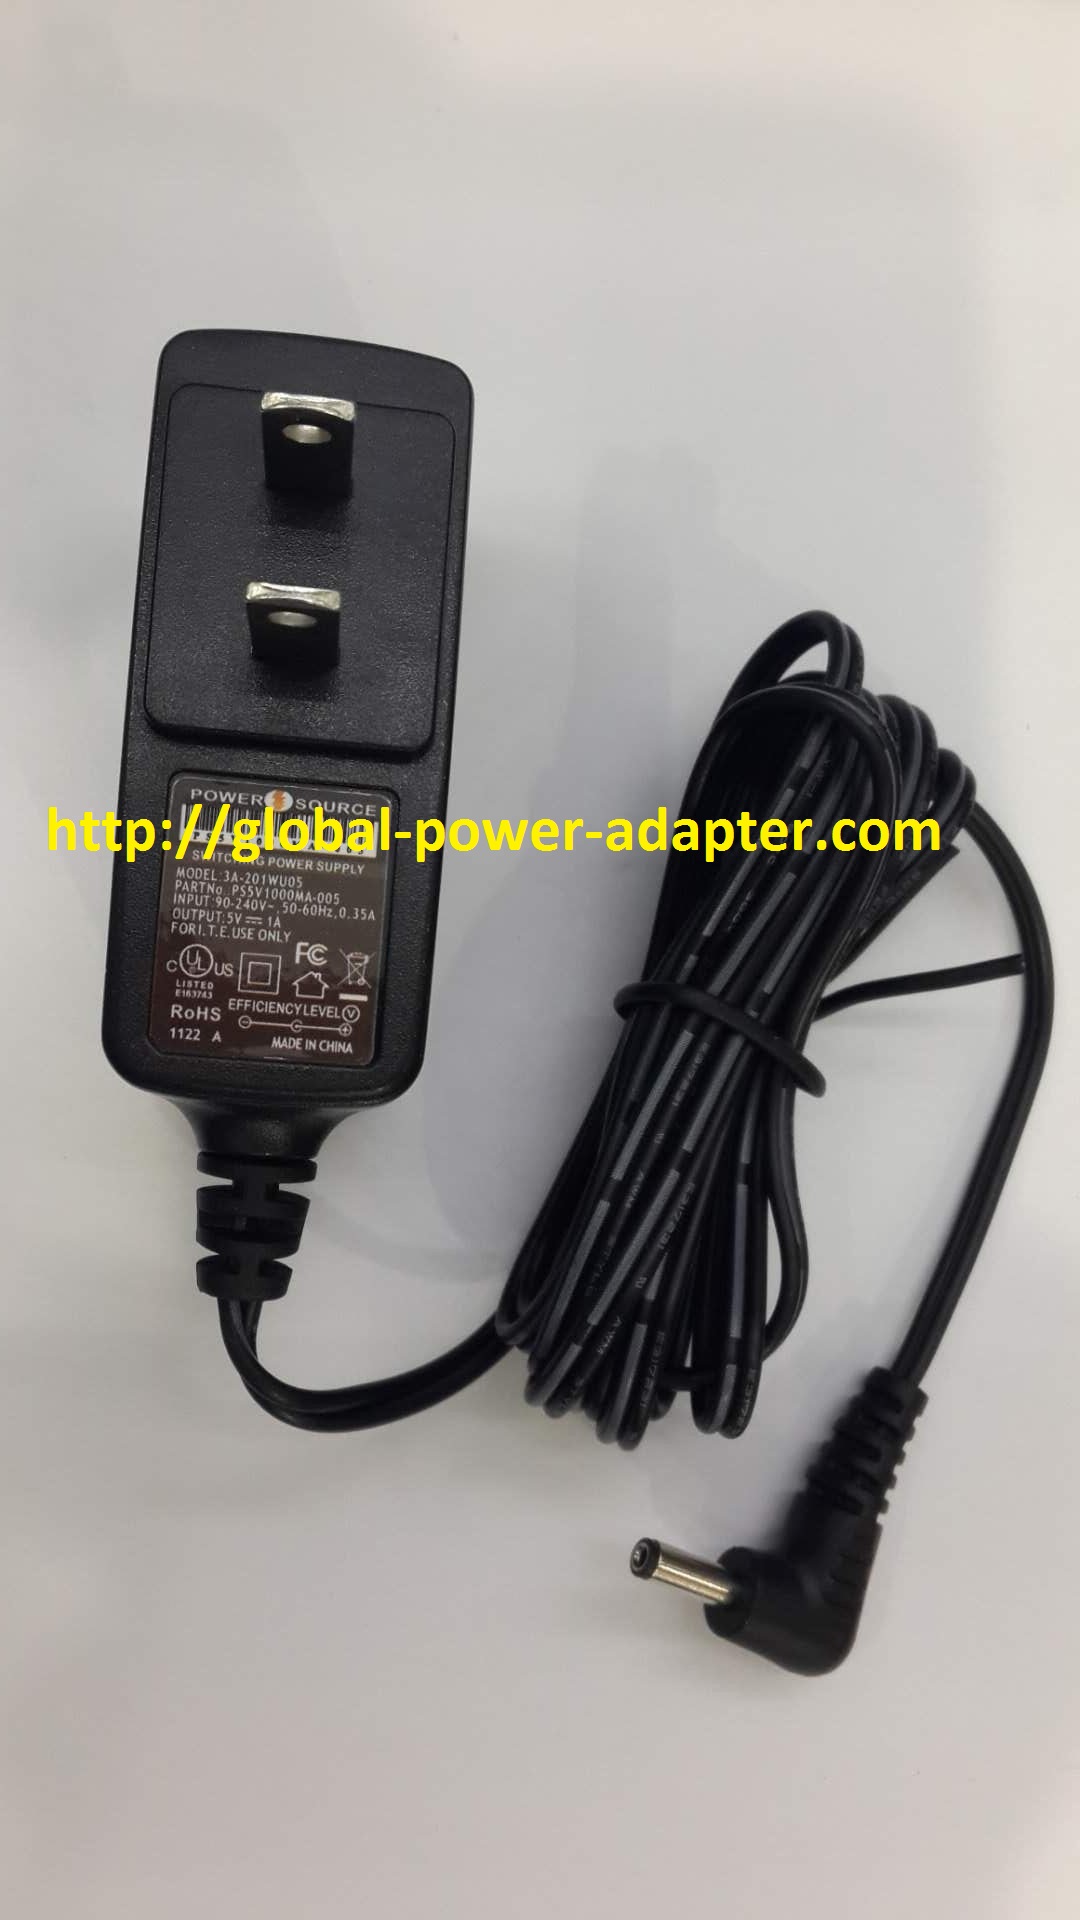 NEW POWER SOURCE 3A-201WU05 for PS5V1000MA-005 POWER SUPPLY